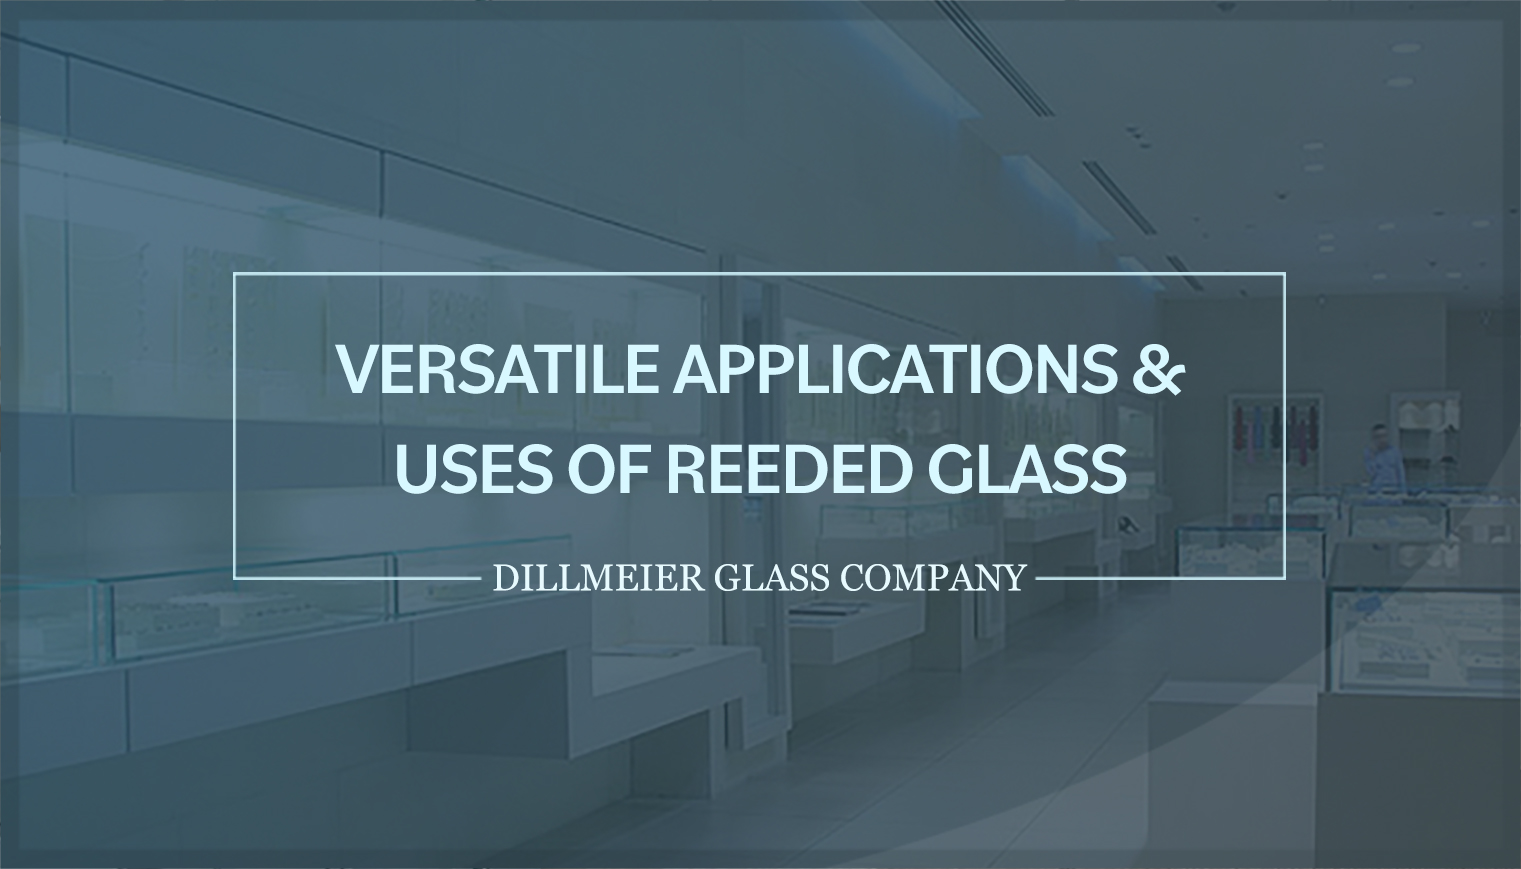 Versatile Applications & Uses of Reeded Glass